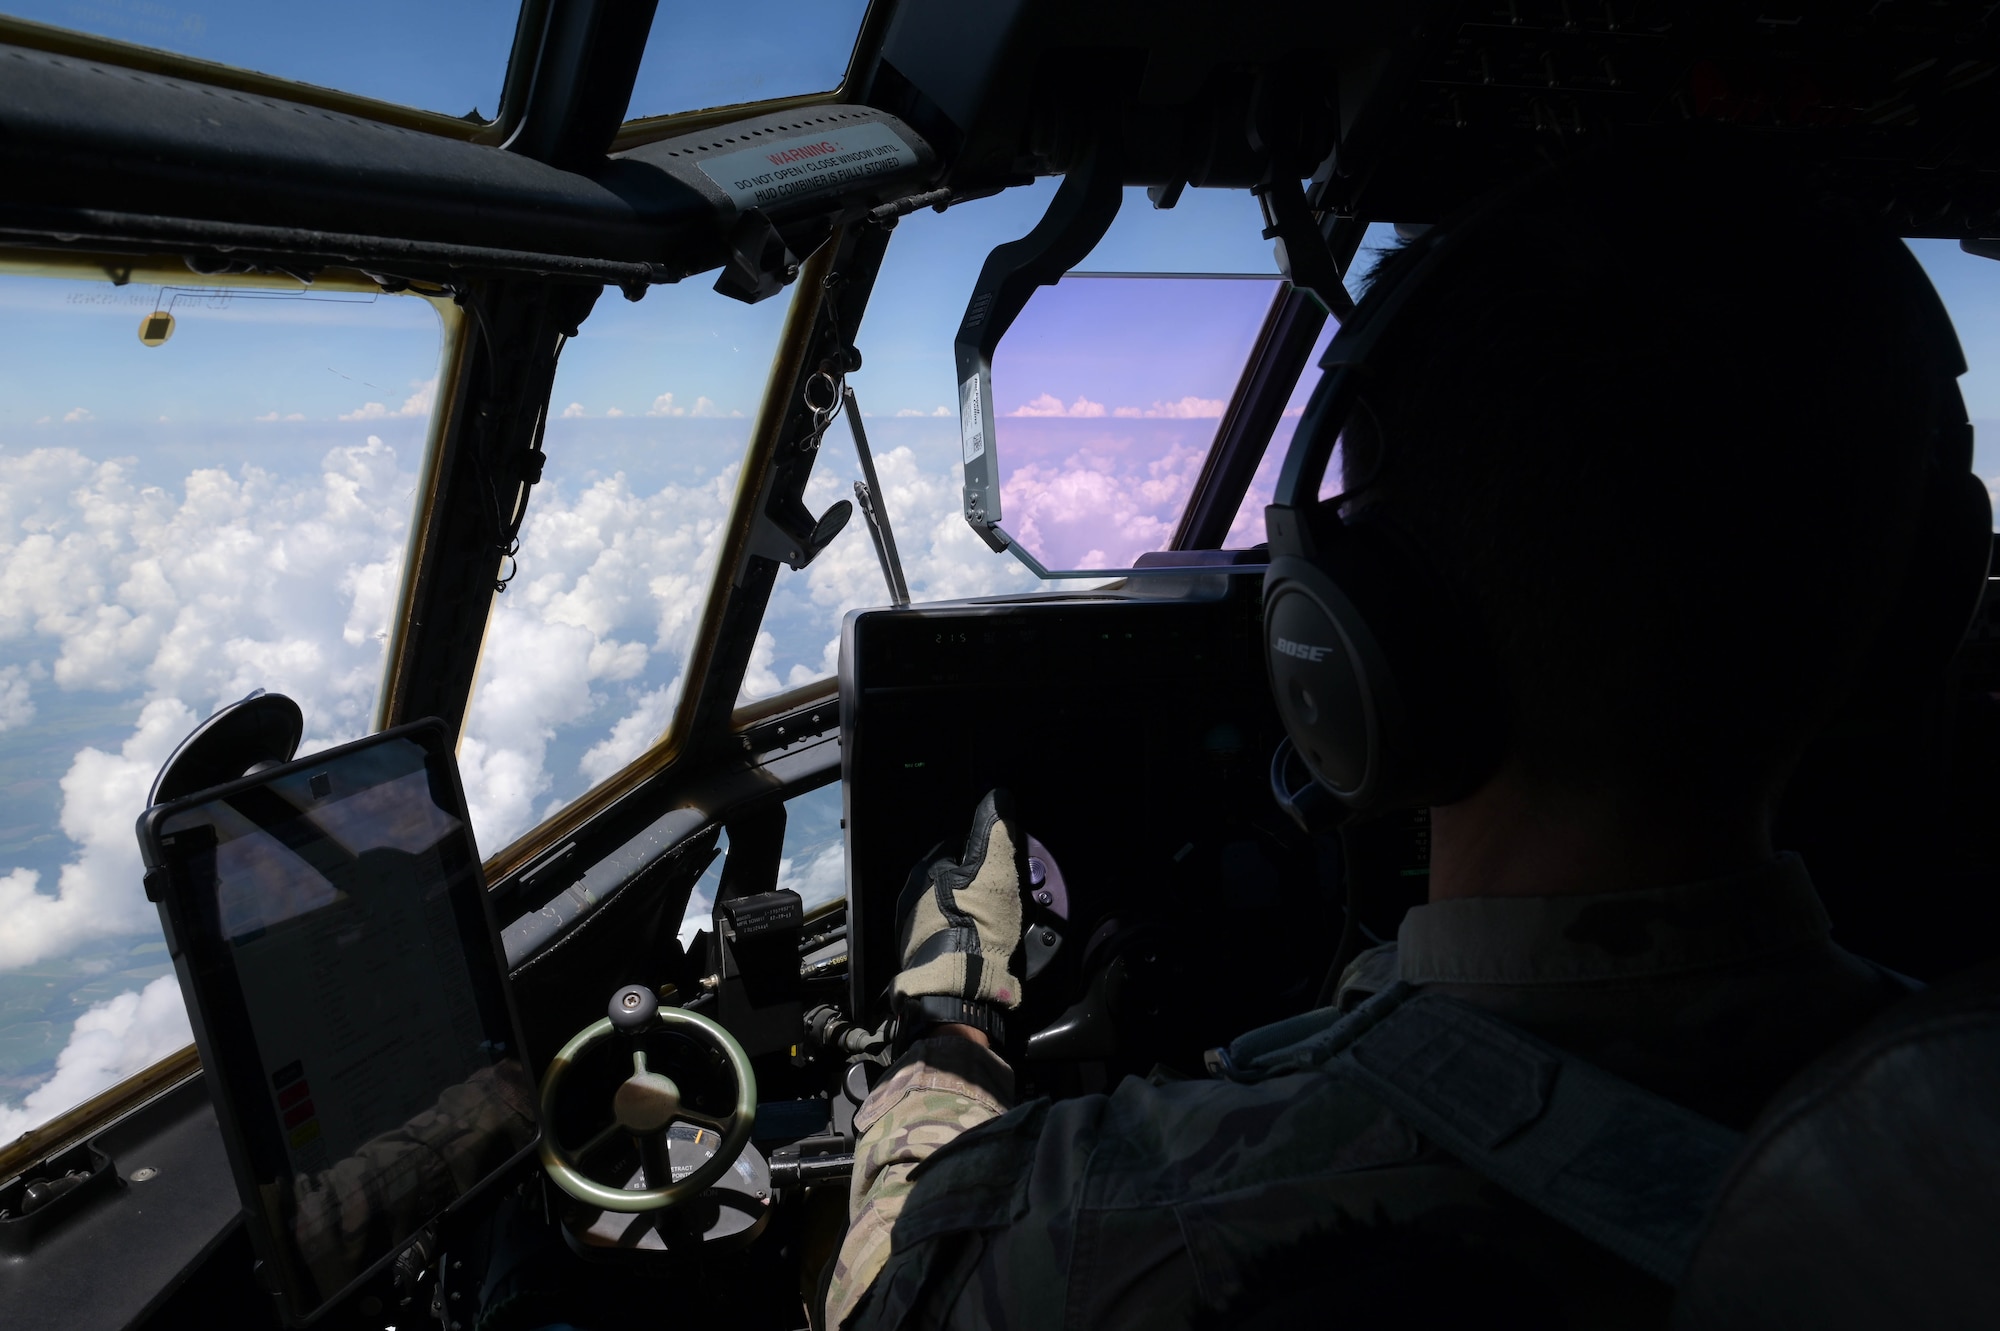 U.S. Air Force Lt. Col. Phillip Varilek, 71st Rescue Squadron HC-130J Combat King II pilot, flies out of Moody Air Force Base, Georgia, Aug. 24, 2021. The 71st RQS conducted an air-to-air refuel with a KC-46A Pegasus assigned to the 916th Air Refueling Wing, Seymour Johnson Air Force Base, North Carolina, as the first operational unit to be refueled by the KC-46A Pegasus. (U.S. Air Force photo by Senior Airman Rebeckah Medeiros)